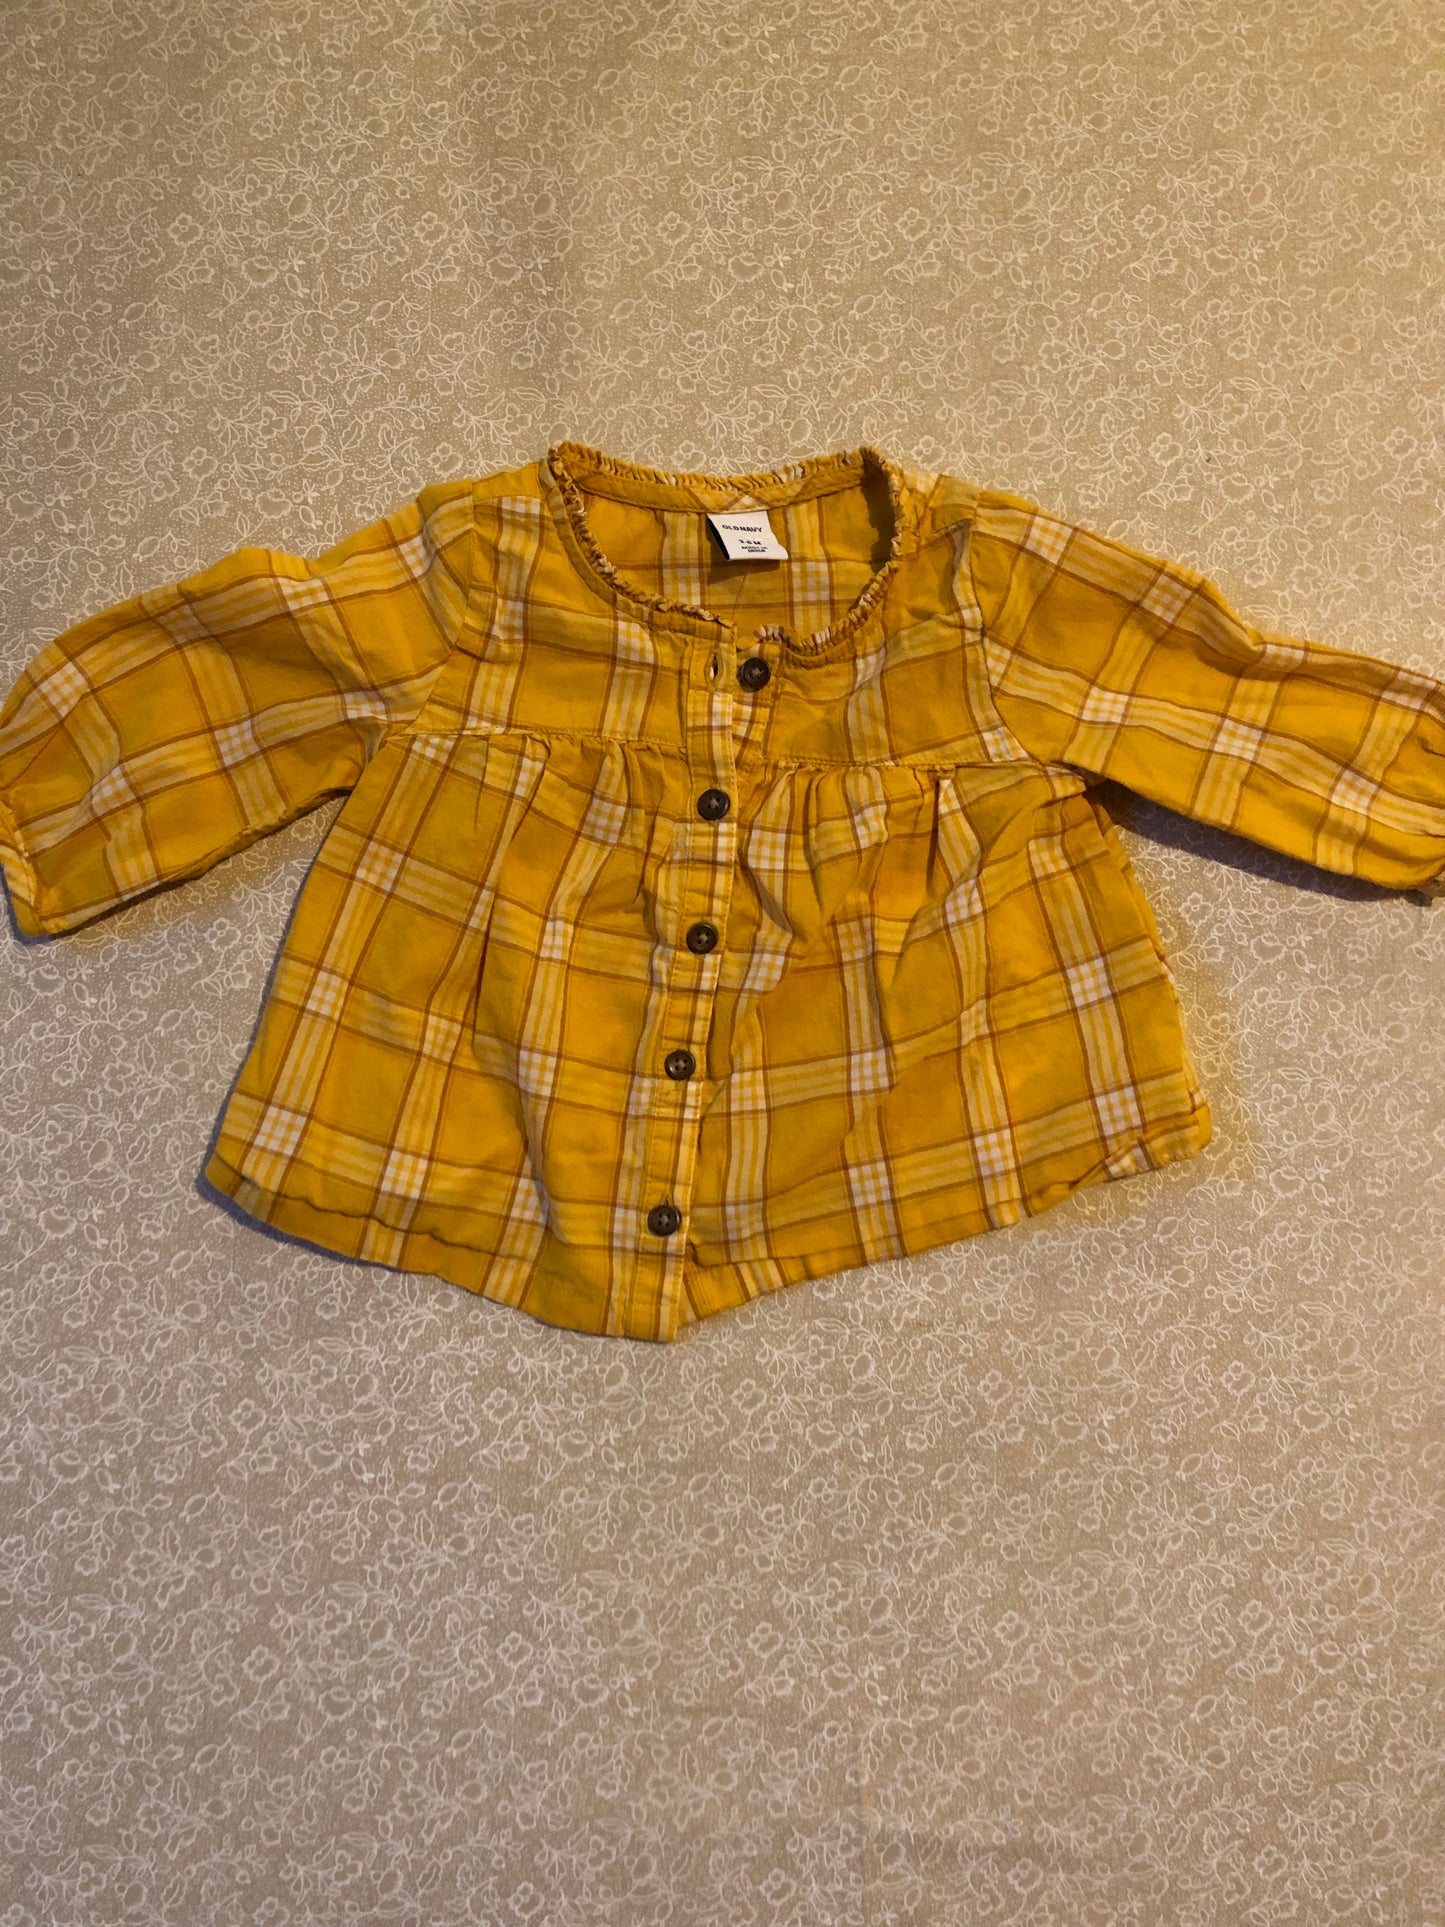 3-6-months-long-sleeve-shirt-old-navy-yellow-plaid